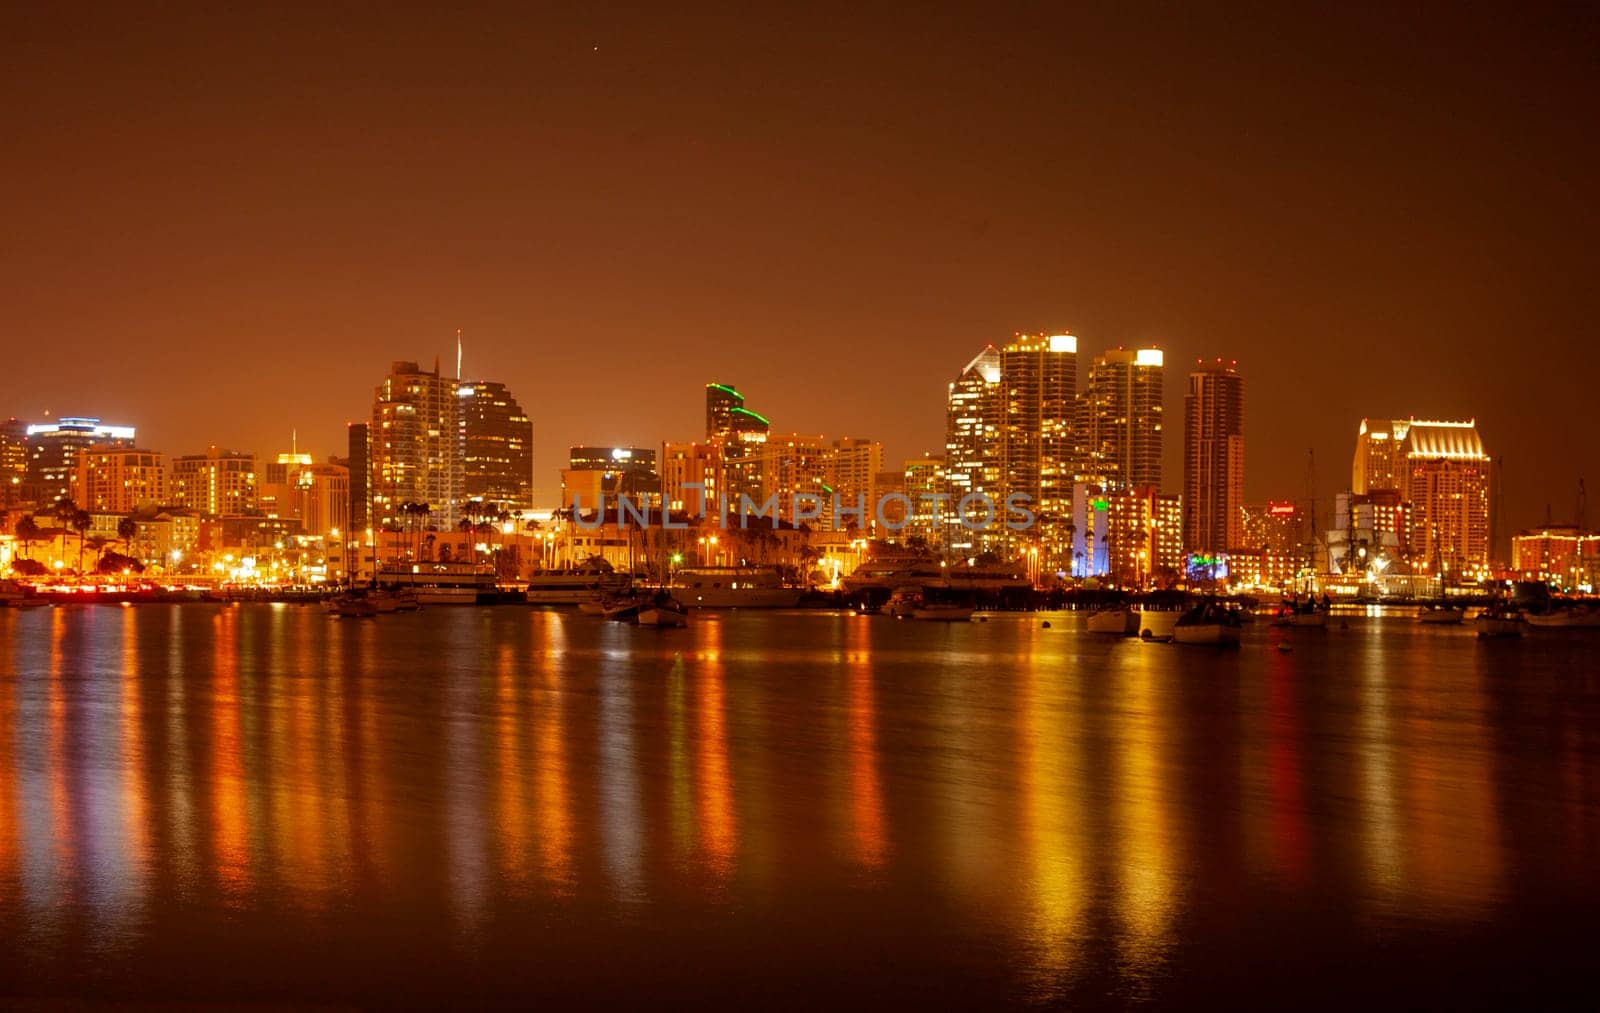 Lights from Hi Rises in San Diego Reflect upon San Diego Bay, California